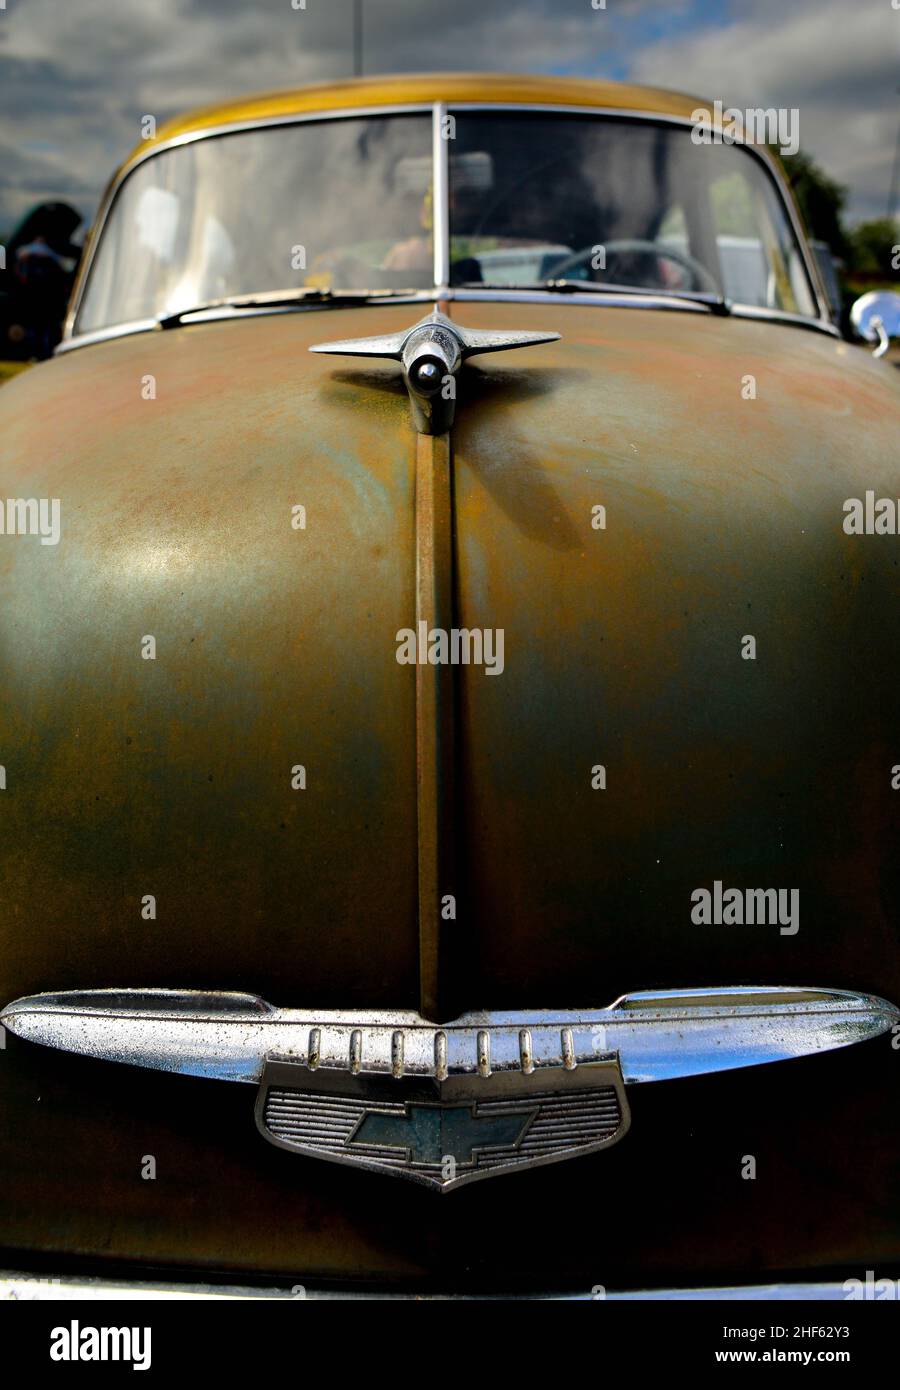 Old 19502 Chevrolet front end detail with chrome hood ornament and patina finish, club members car of Stockport Rainy City Cruisers. Stock Photo